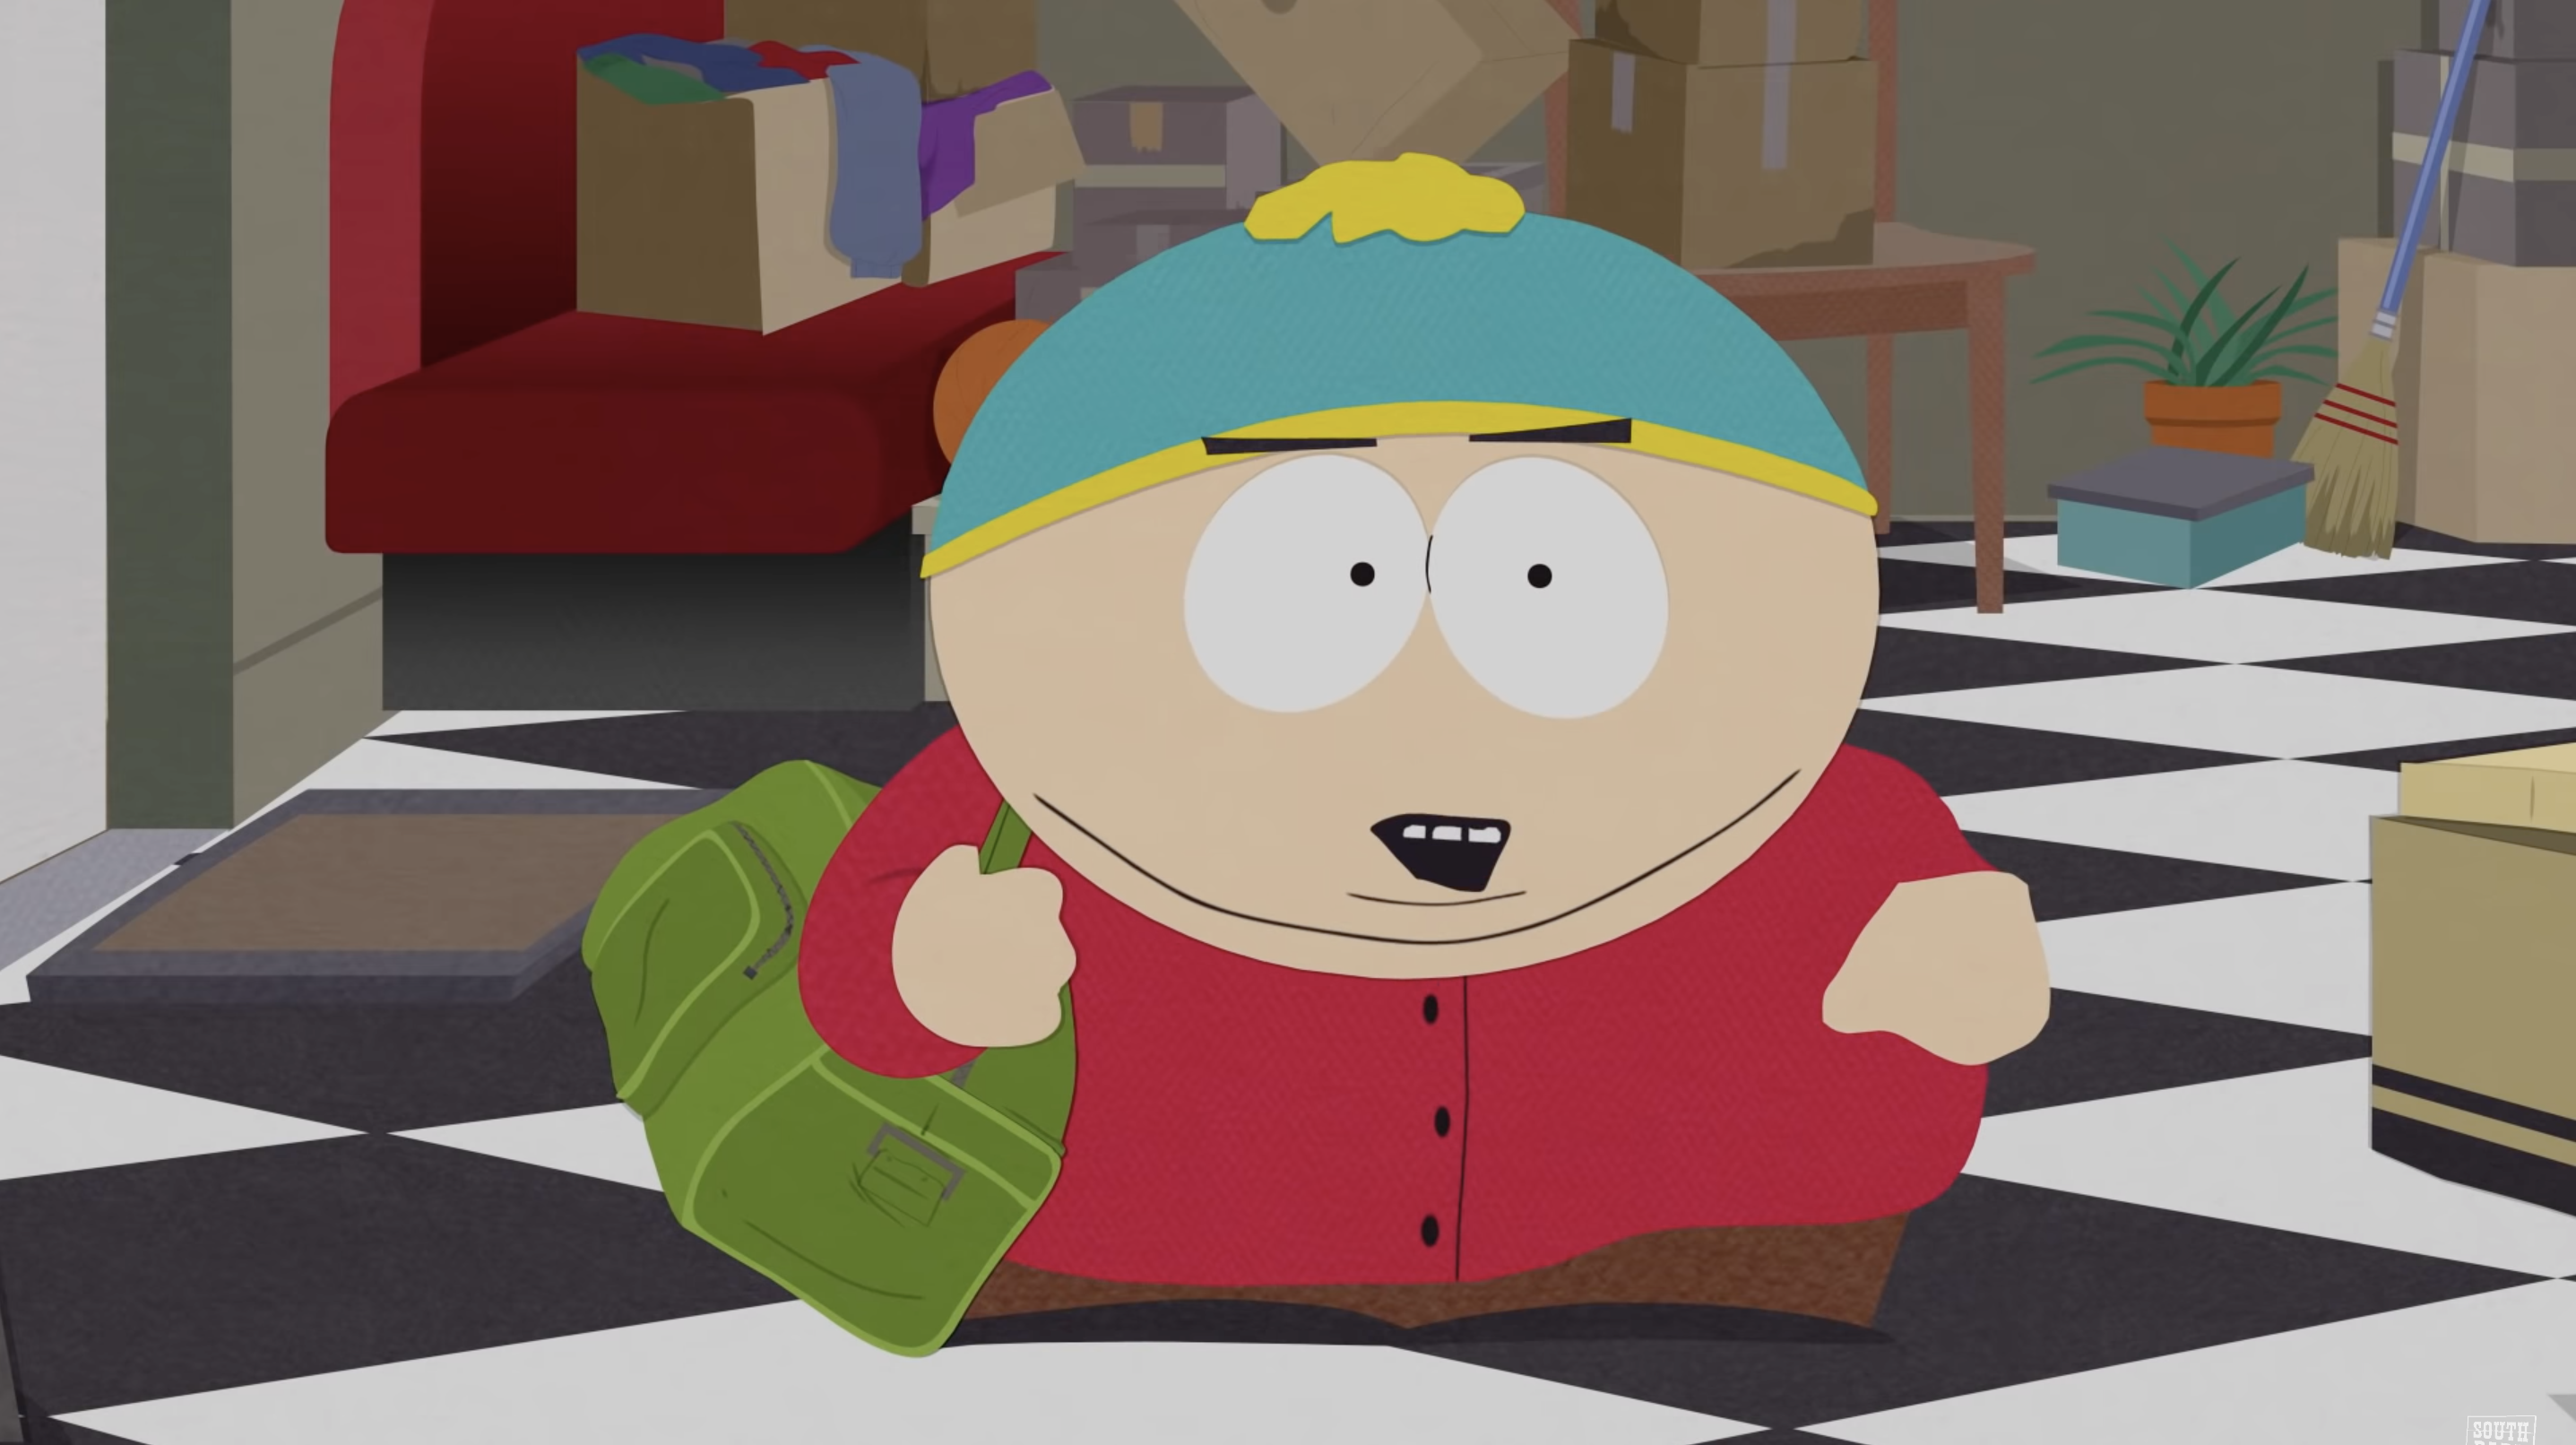 Will South Park: The Streaming Wars 2 come out? Here’s what we know